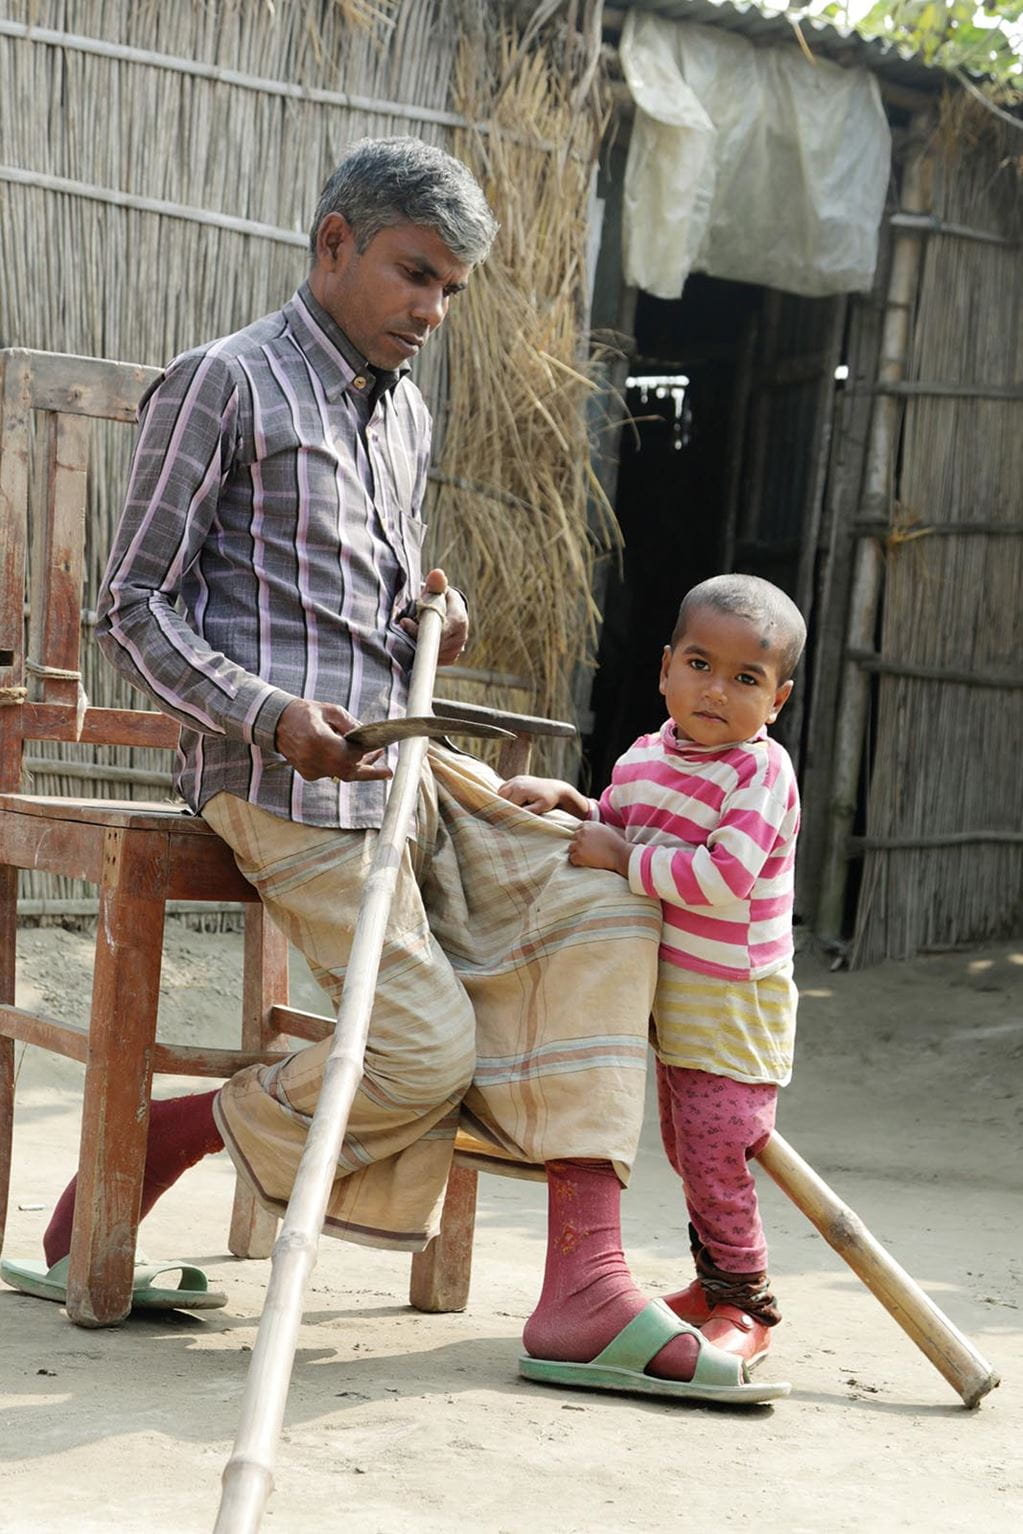 In many countries, including Bangladesh, people with disabilities are particularly vulnerable to floods and other disasters. Photo: CBM/Patwary